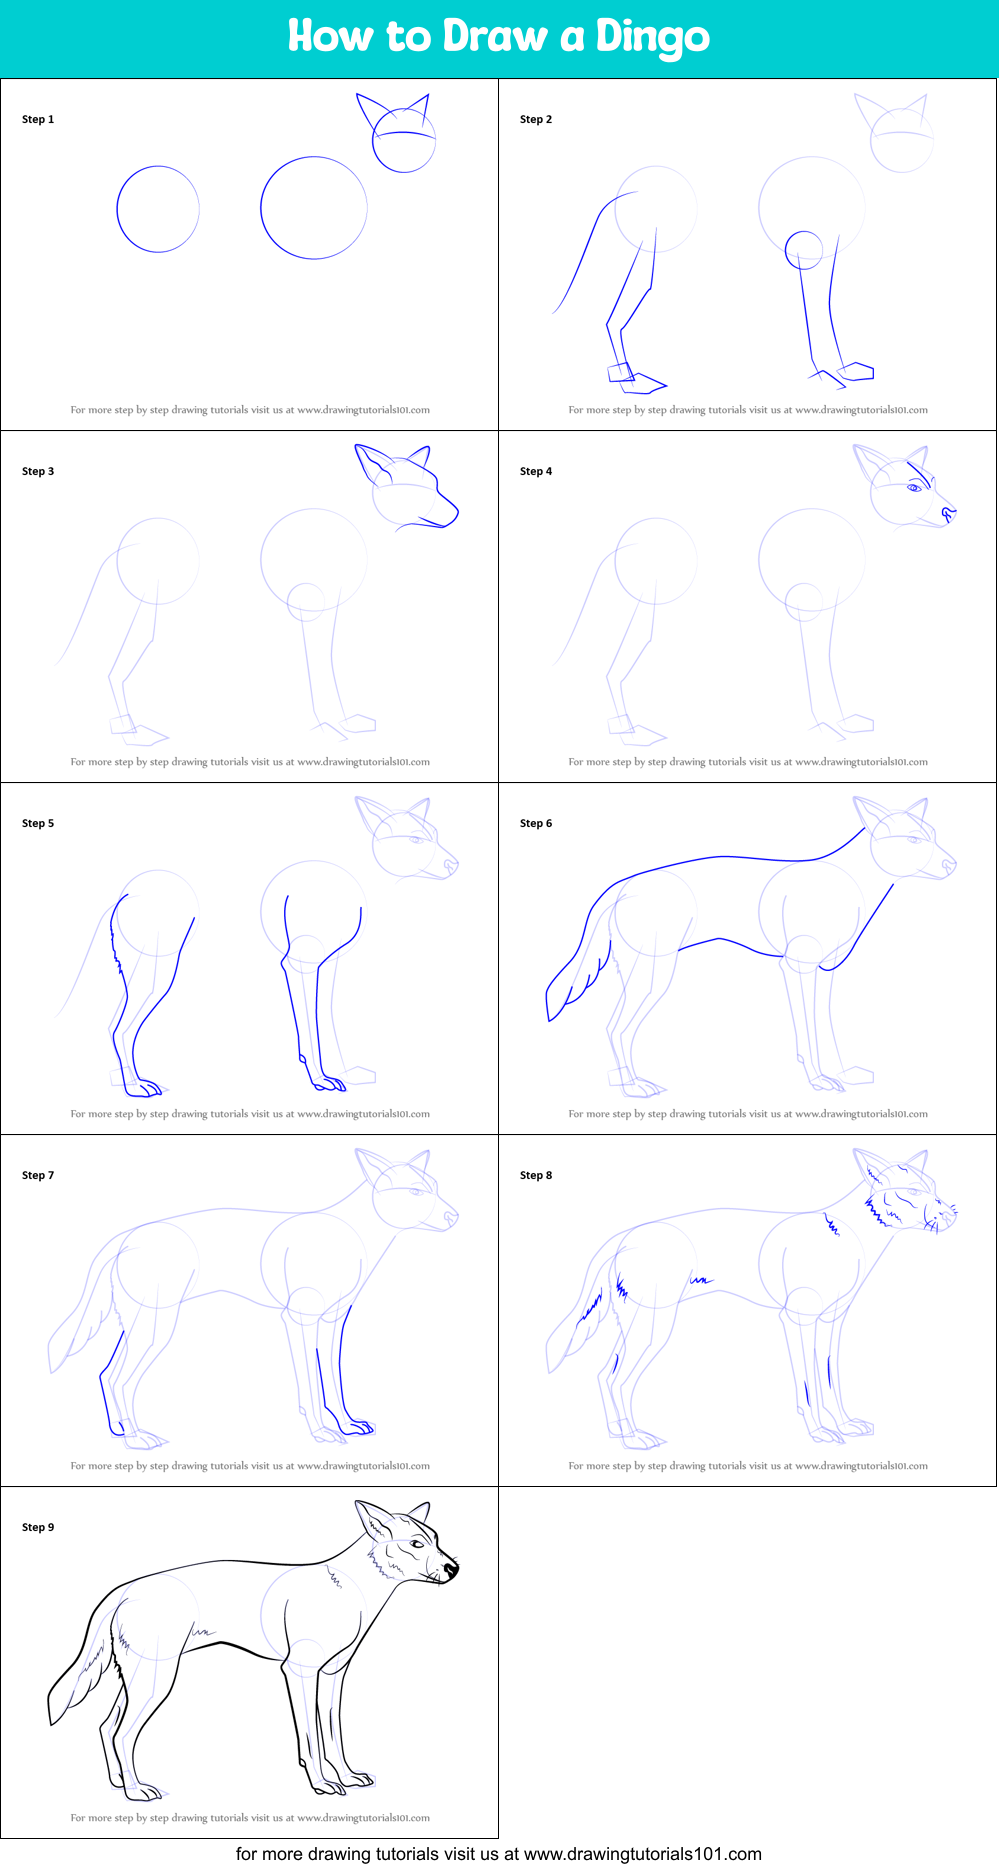 How to Draw a Dingo printable step by step drawing sheet